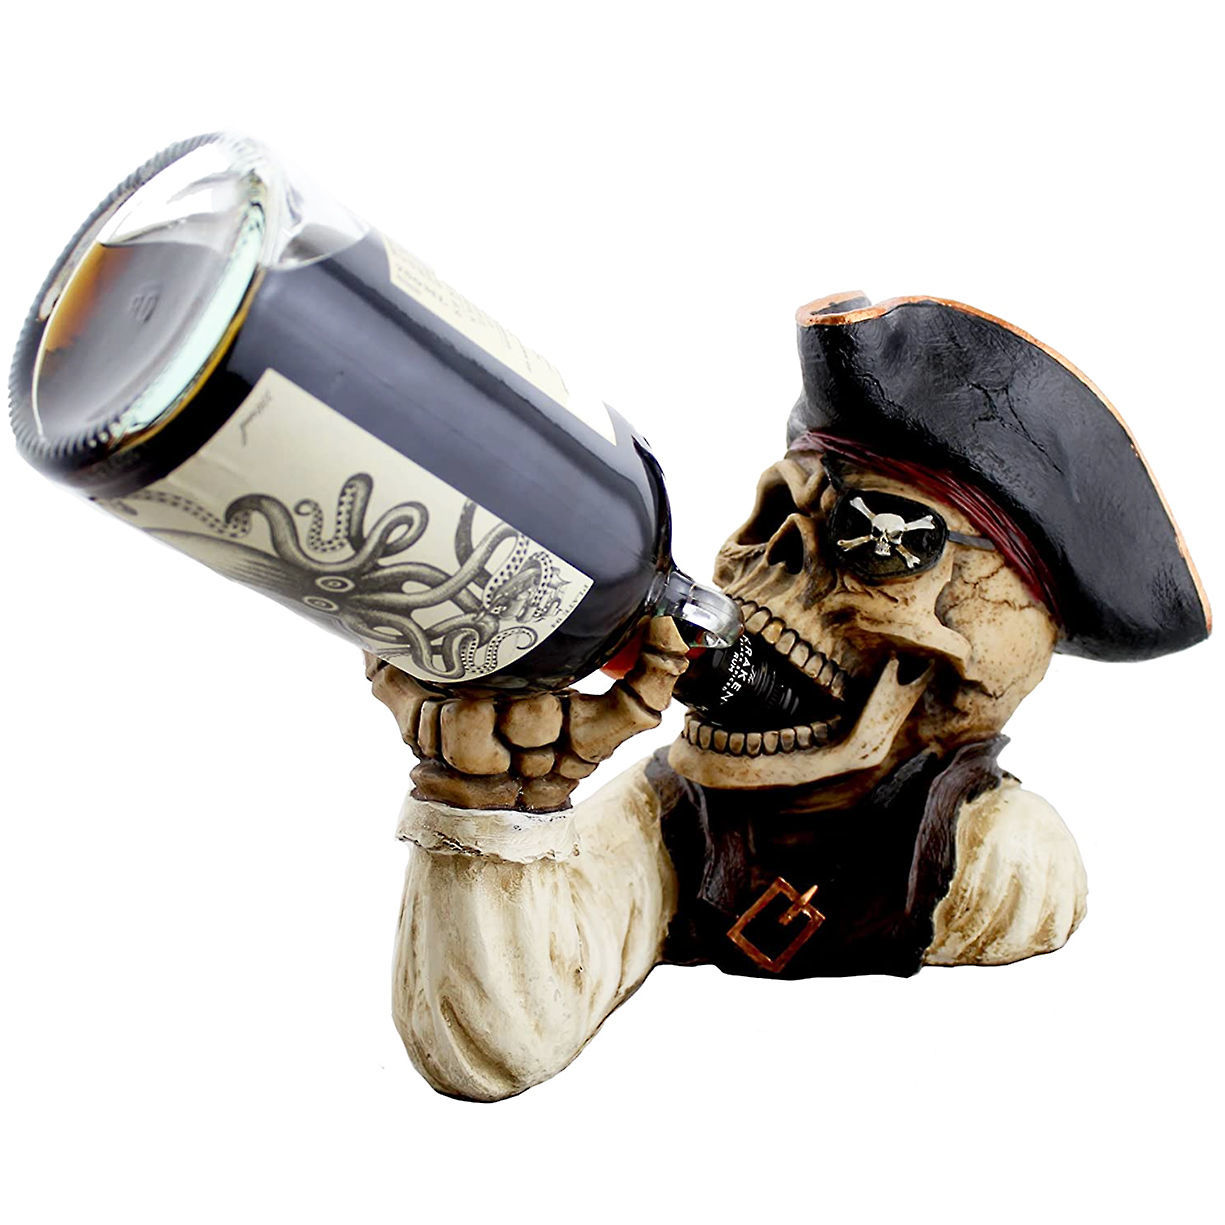 Booty of the Vine Wine Bottle Holder polyresin bottle caddy with skeleton pirate with tricorn hat and Jolly Roger eye patch